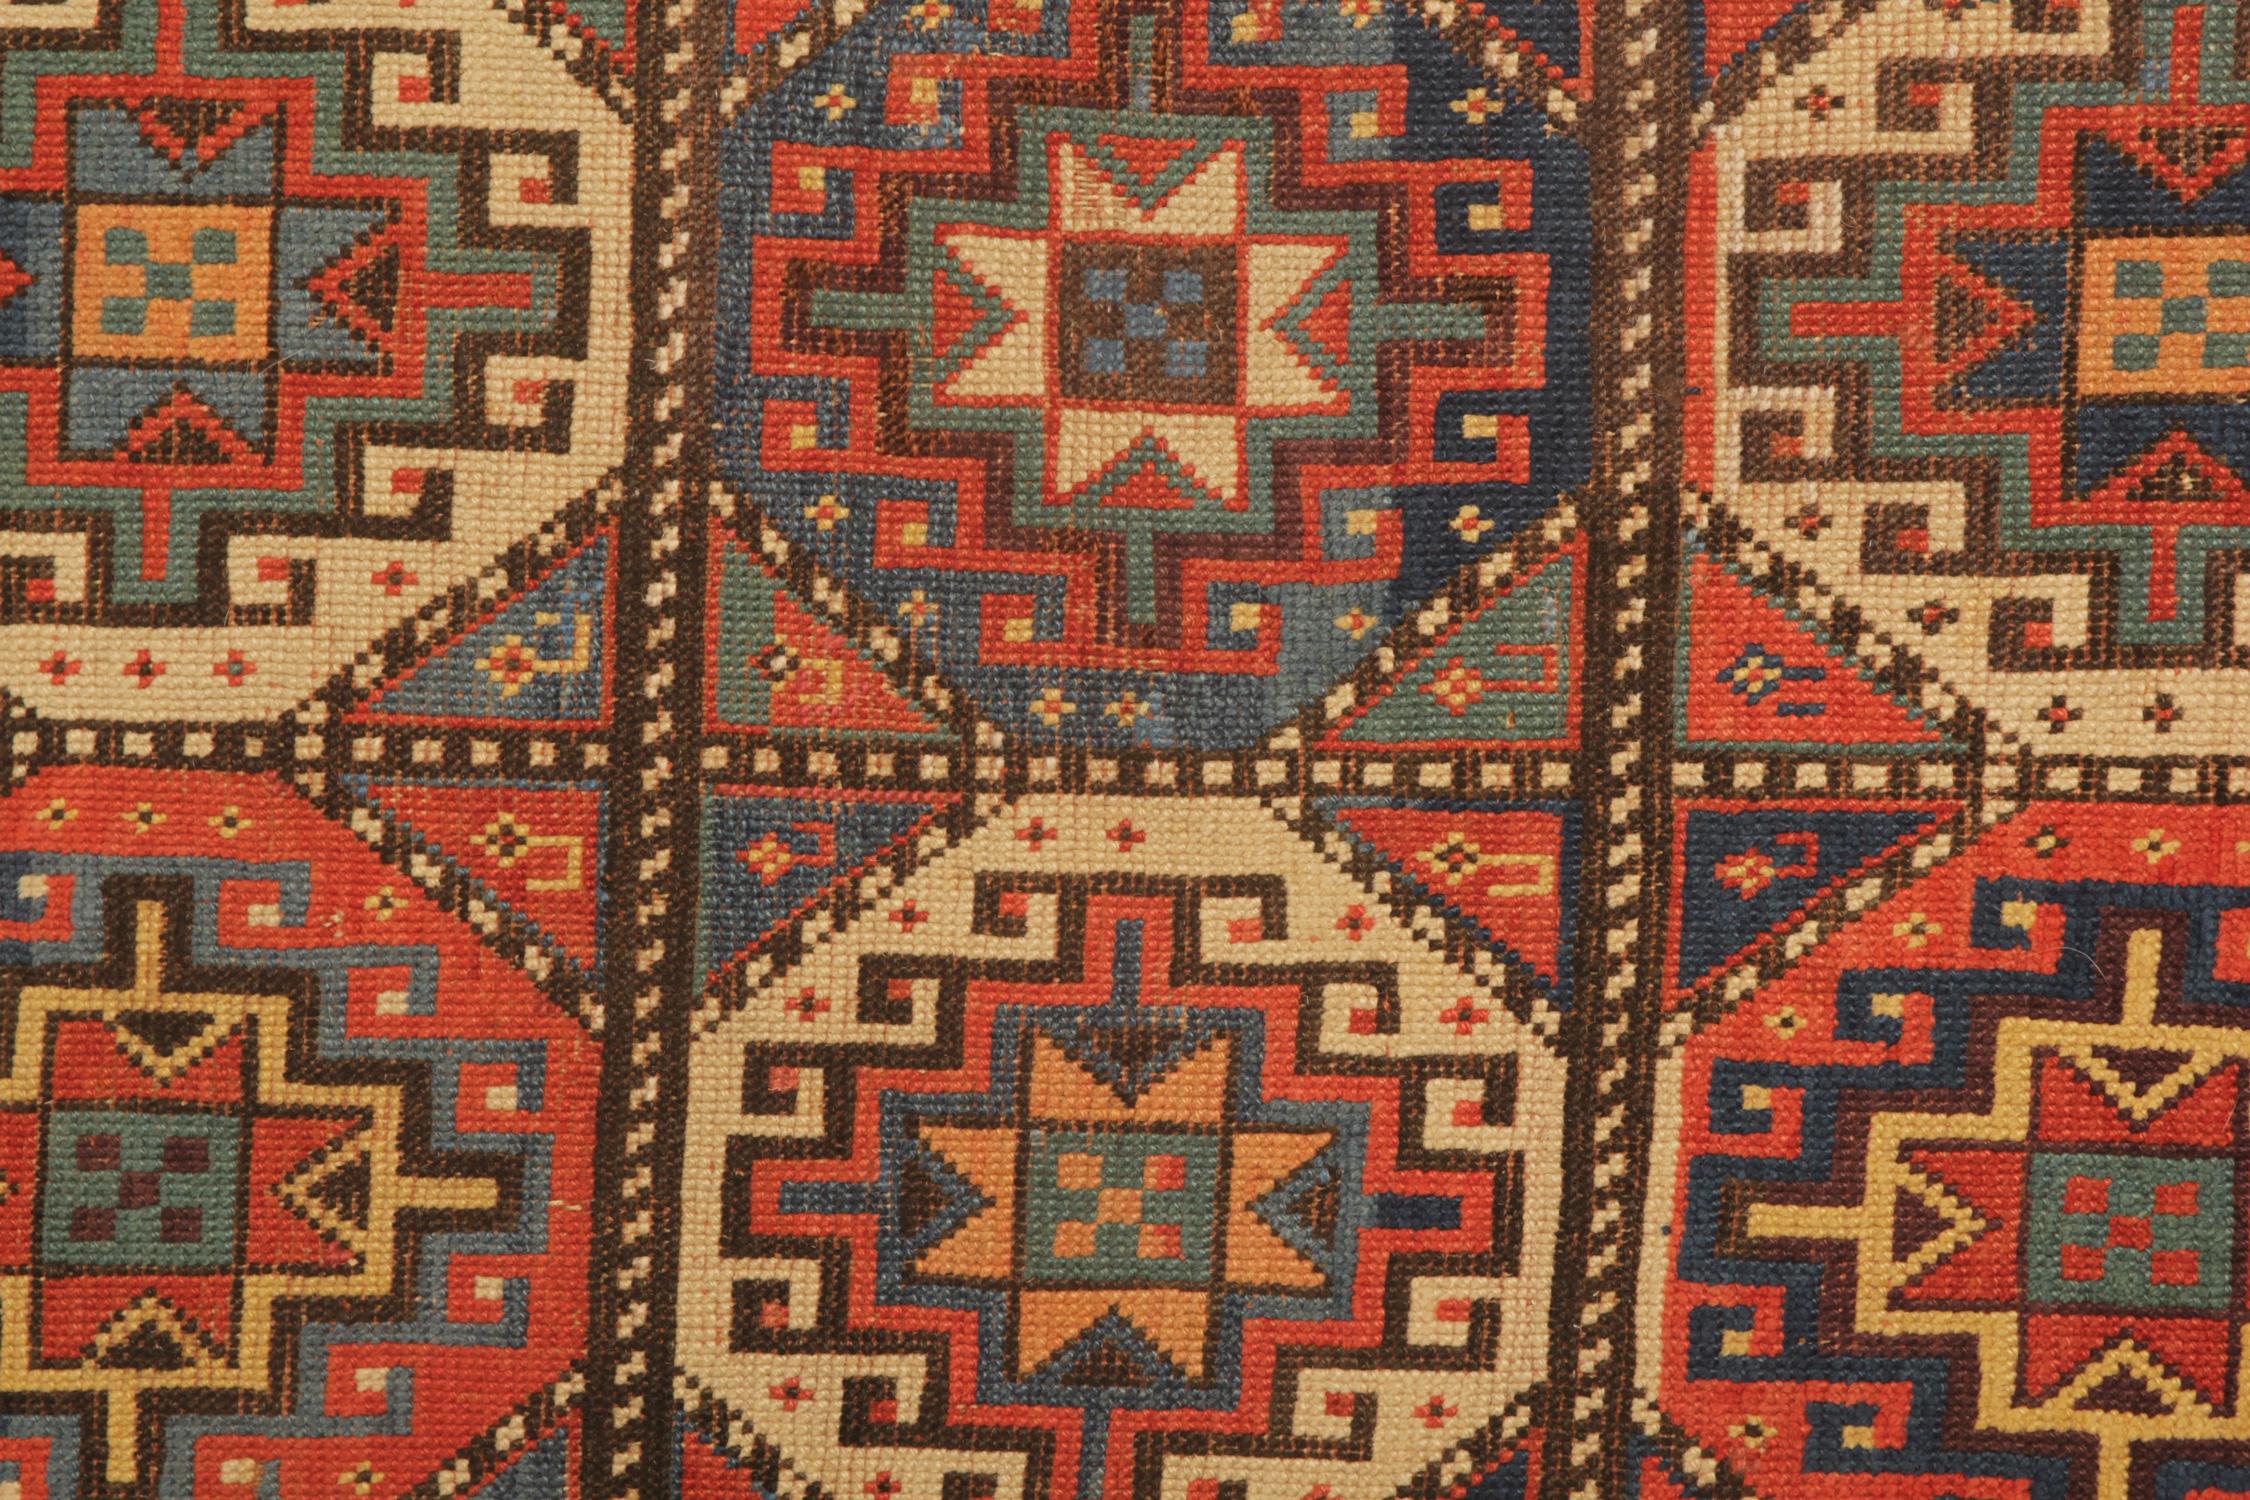 An excellent example of Caucasian carpet rug weaving from the Kazak region of Azerbaijan. Though these orange-red ground all-over patterned rugs may seem like from a distance, but this woven rug has a great range of rich organic vegetable dyes